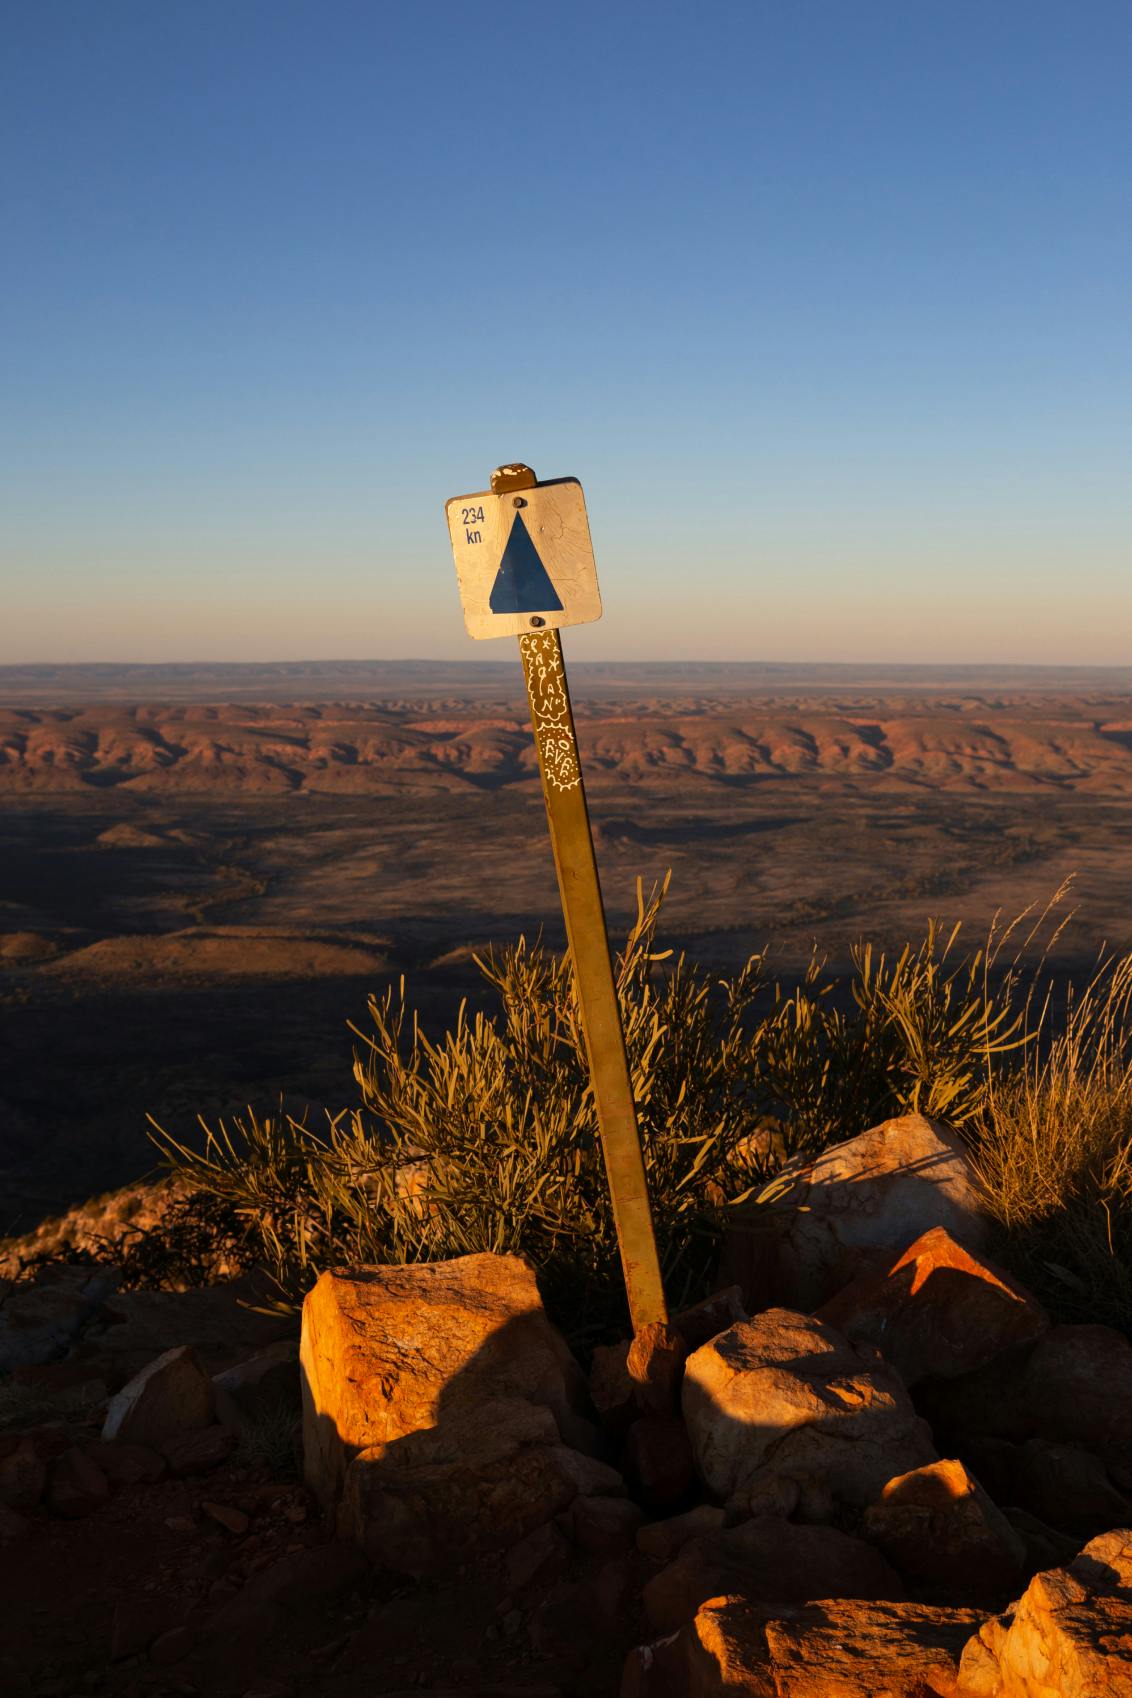 Sign indicating distance in Australian outback - experience a multi-day journey with short hikes along the Larapinta trail